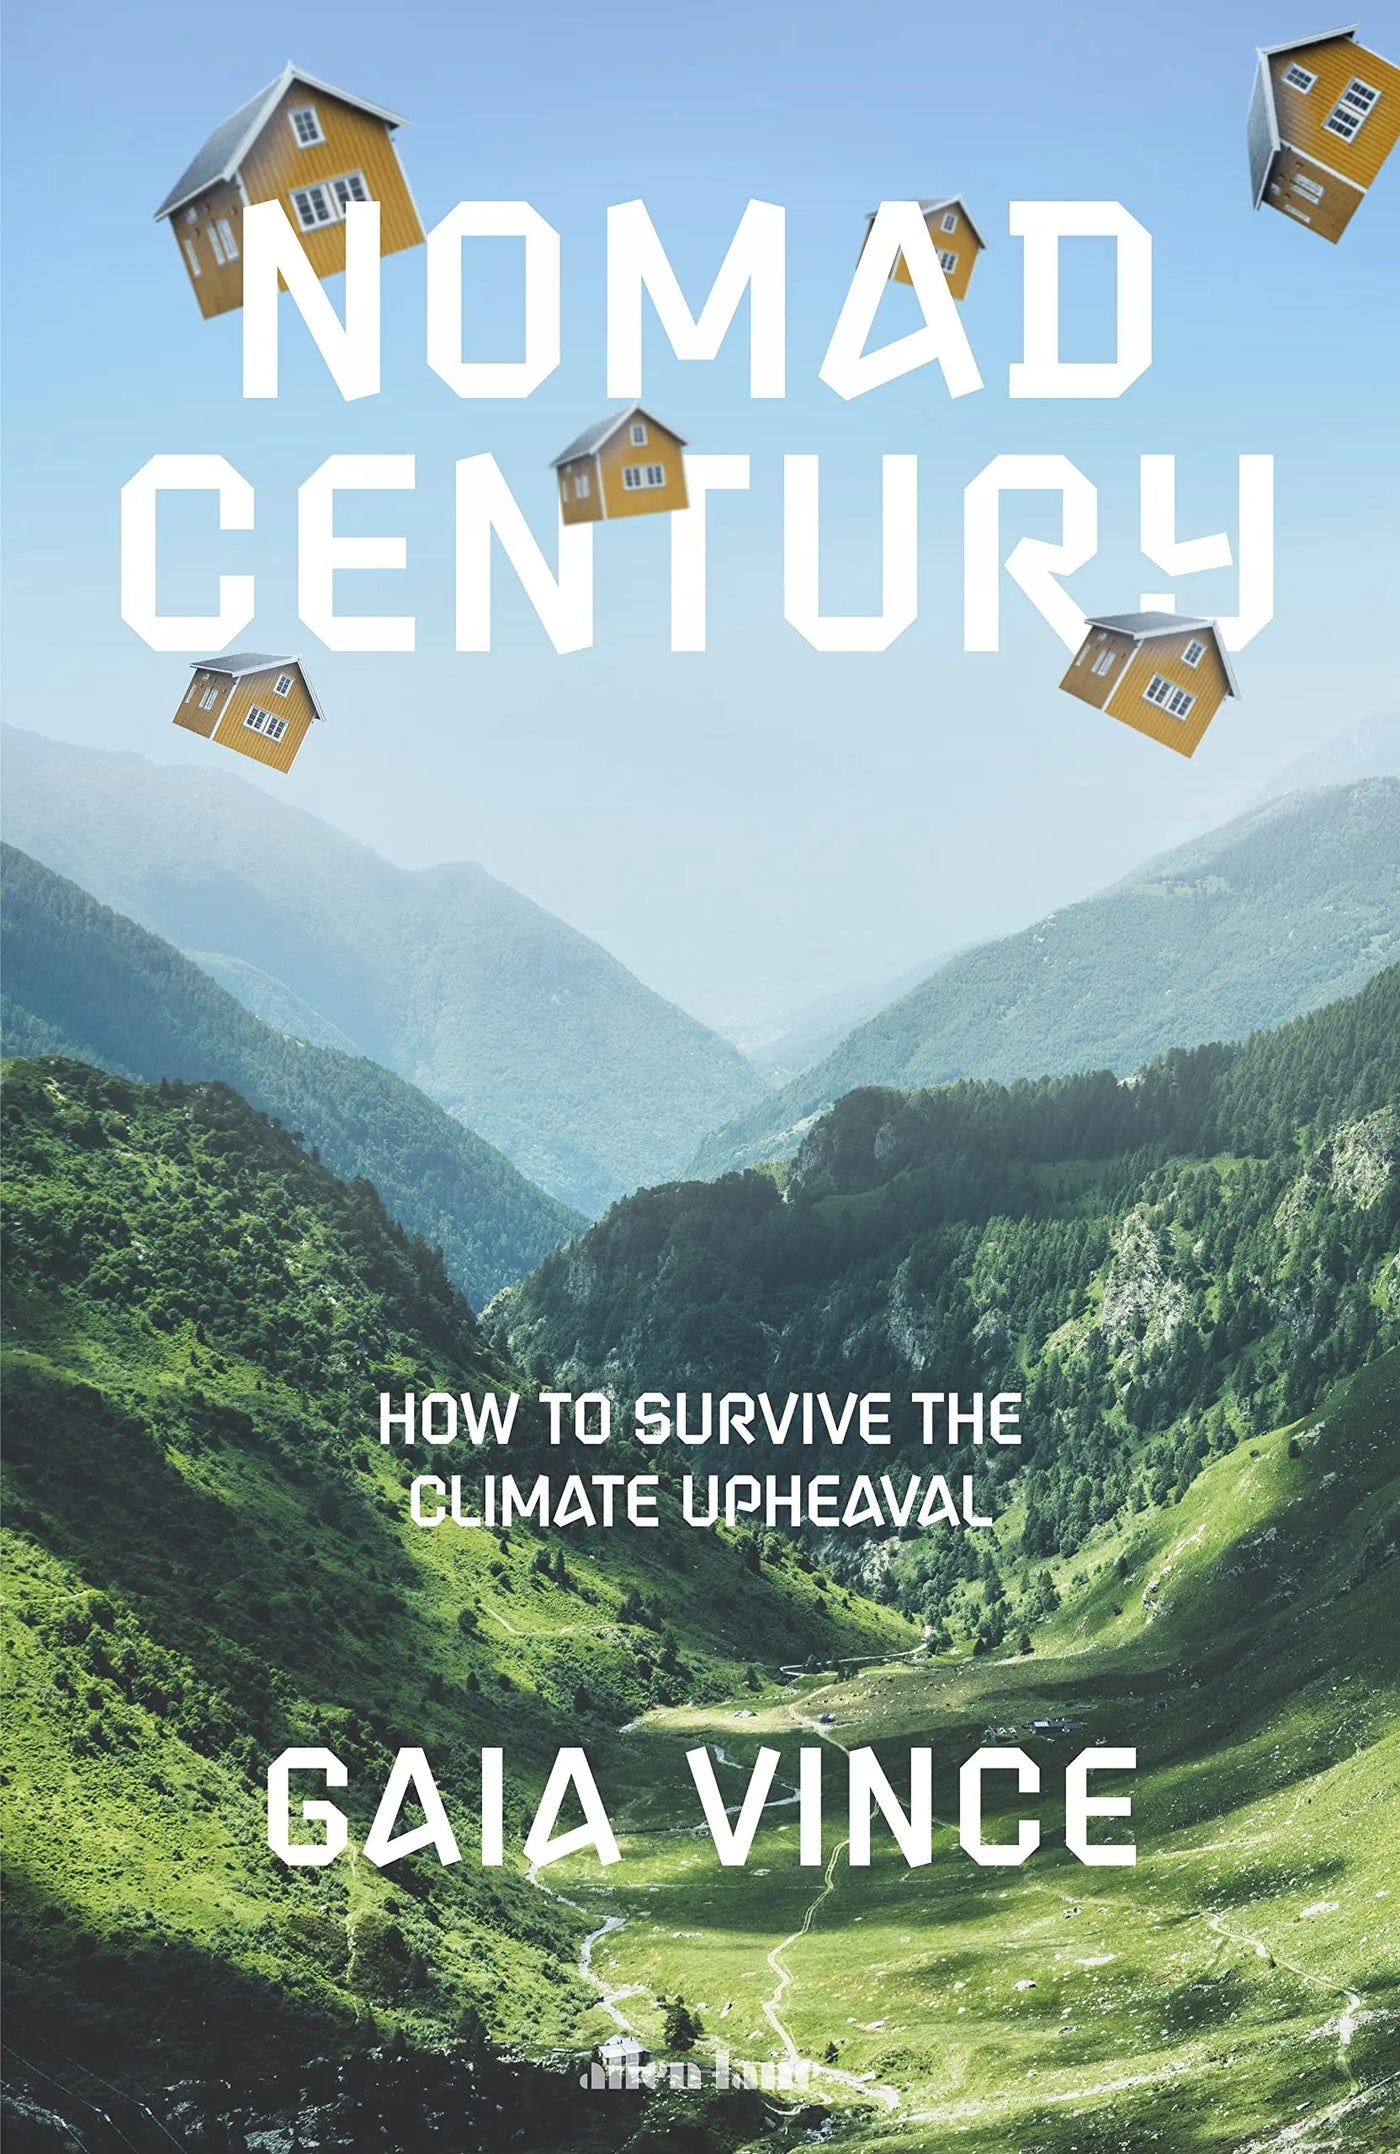 Nomad Century: How To Survive The Climate Upheaval Hardcover - Migration Museum Shop